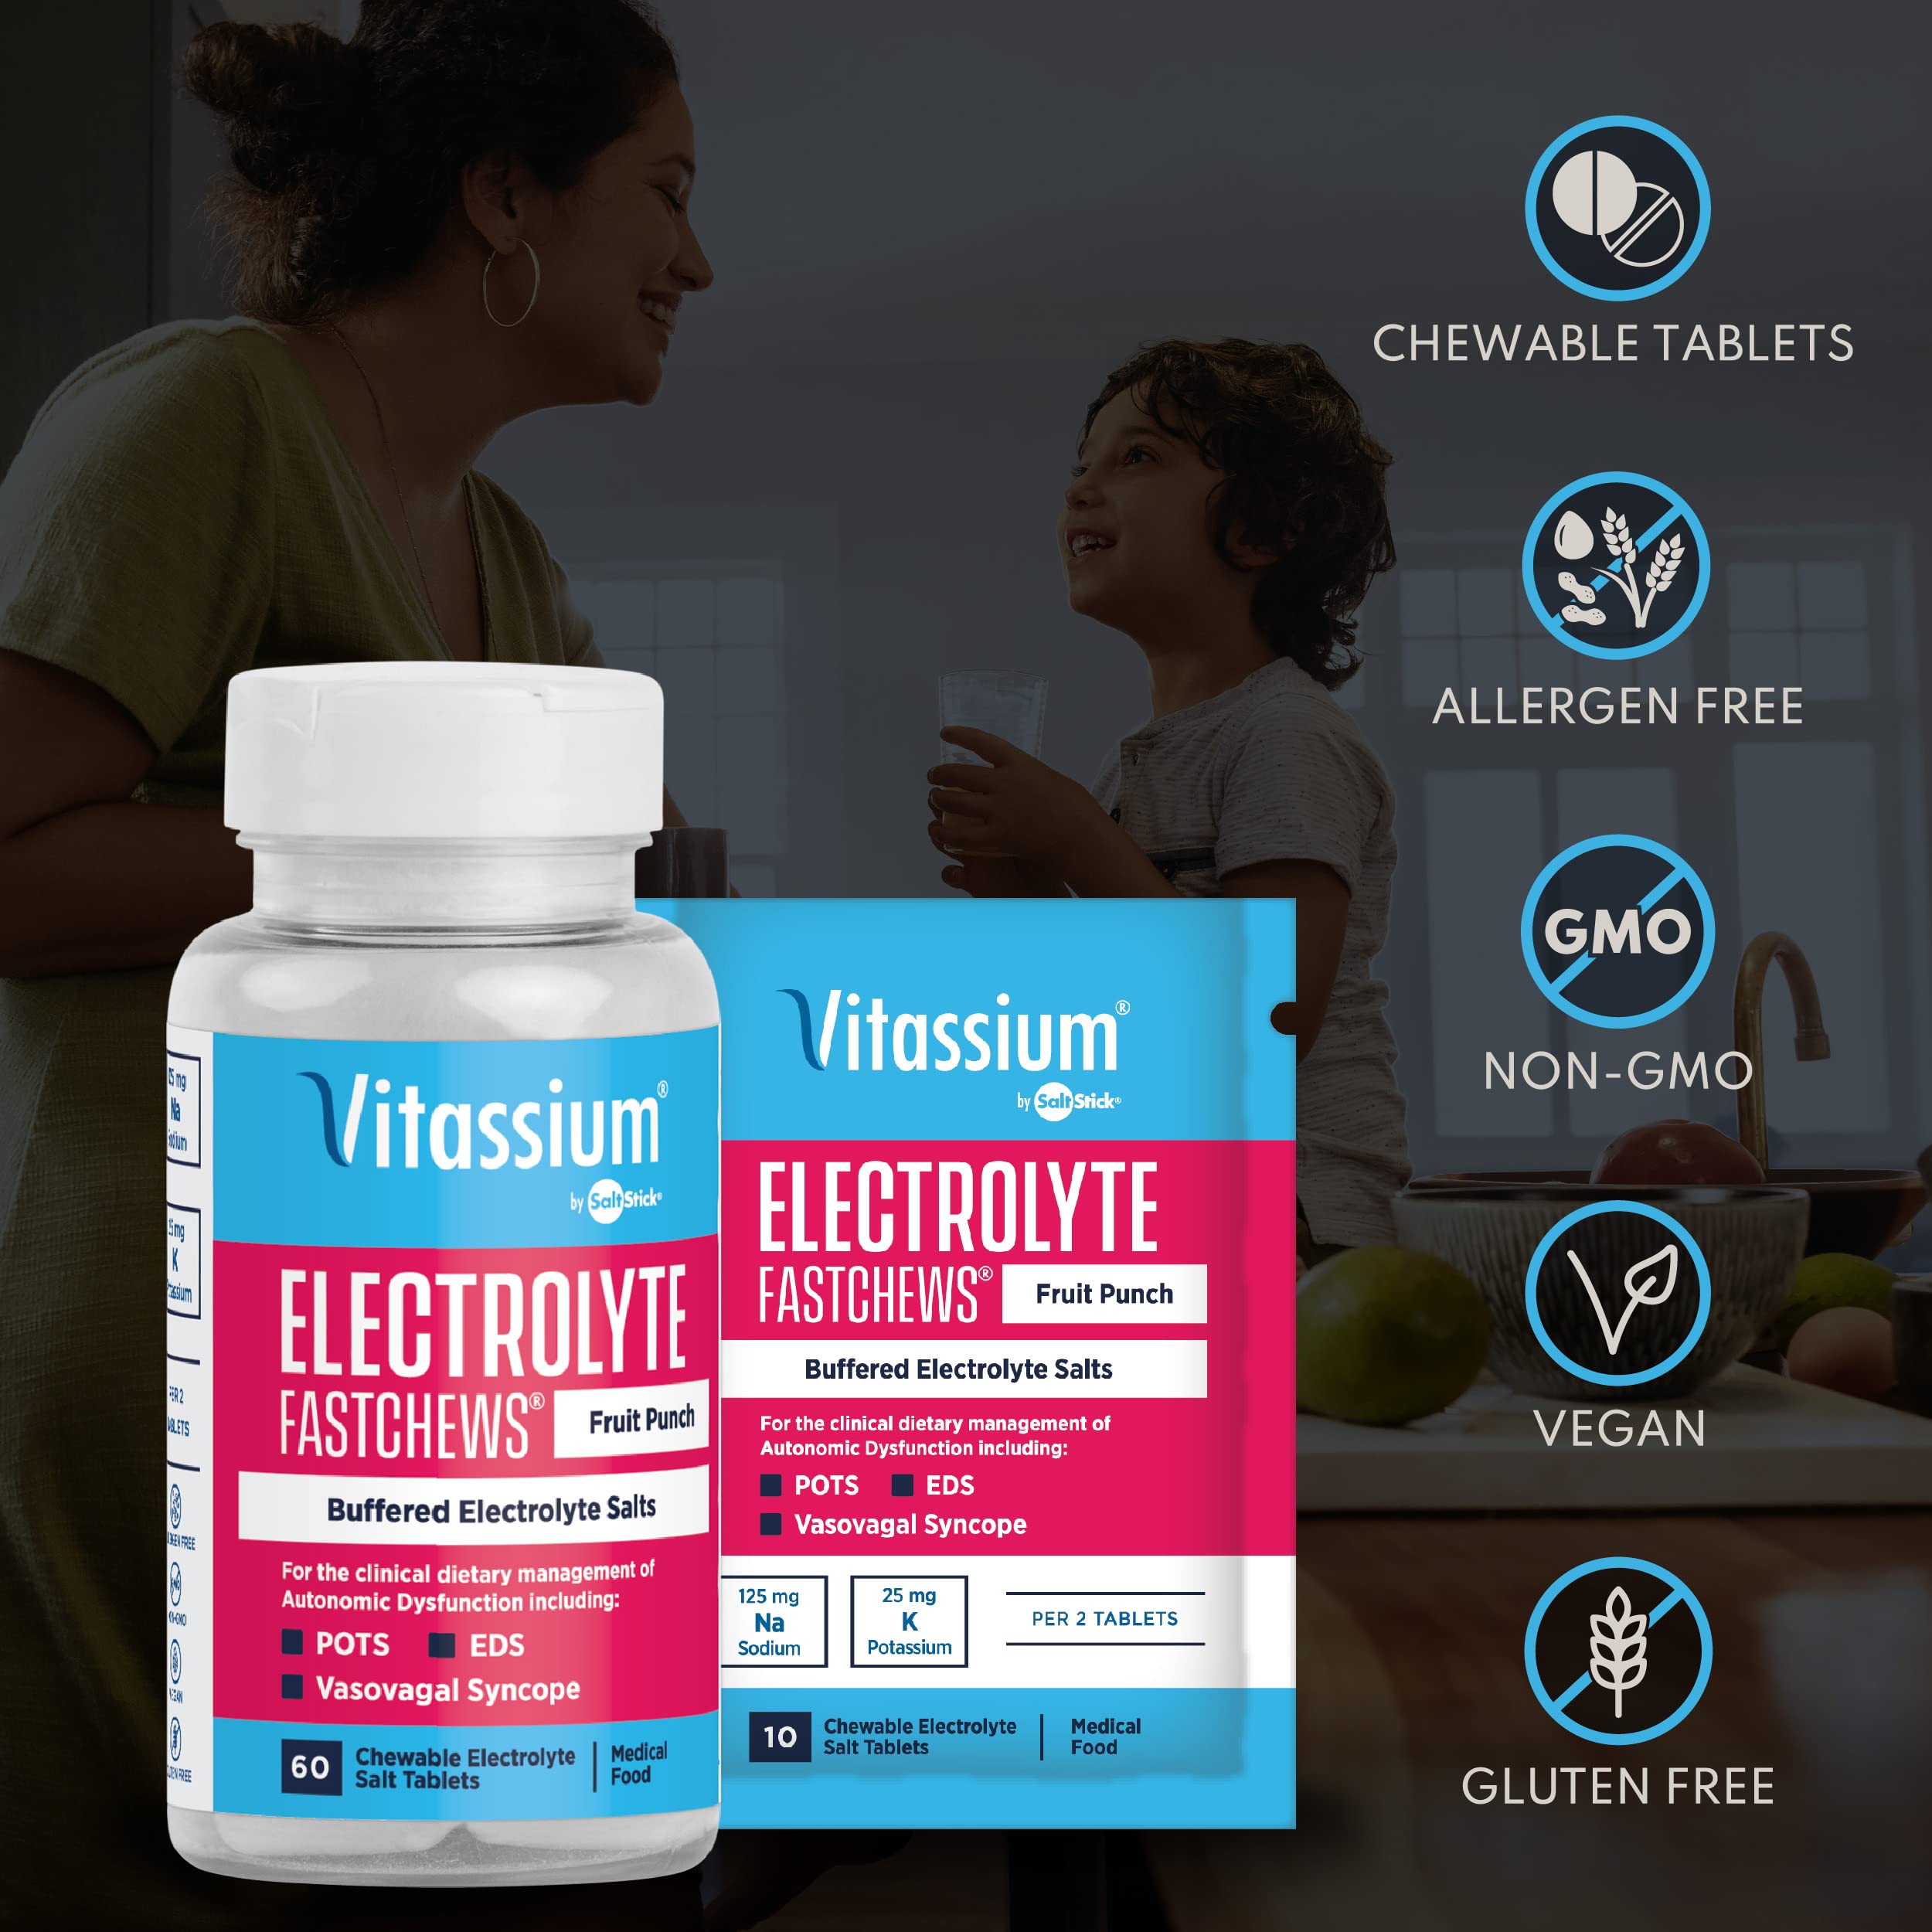 Vitassium FastChews - Fruit Punch Flavored Chewable Electrolytes - Sodium and Potassium for Rapid Relief - Non-GMO, Vegan, Gluten & Allergen Free - 60 Electrolyte Tablets Per Bottle